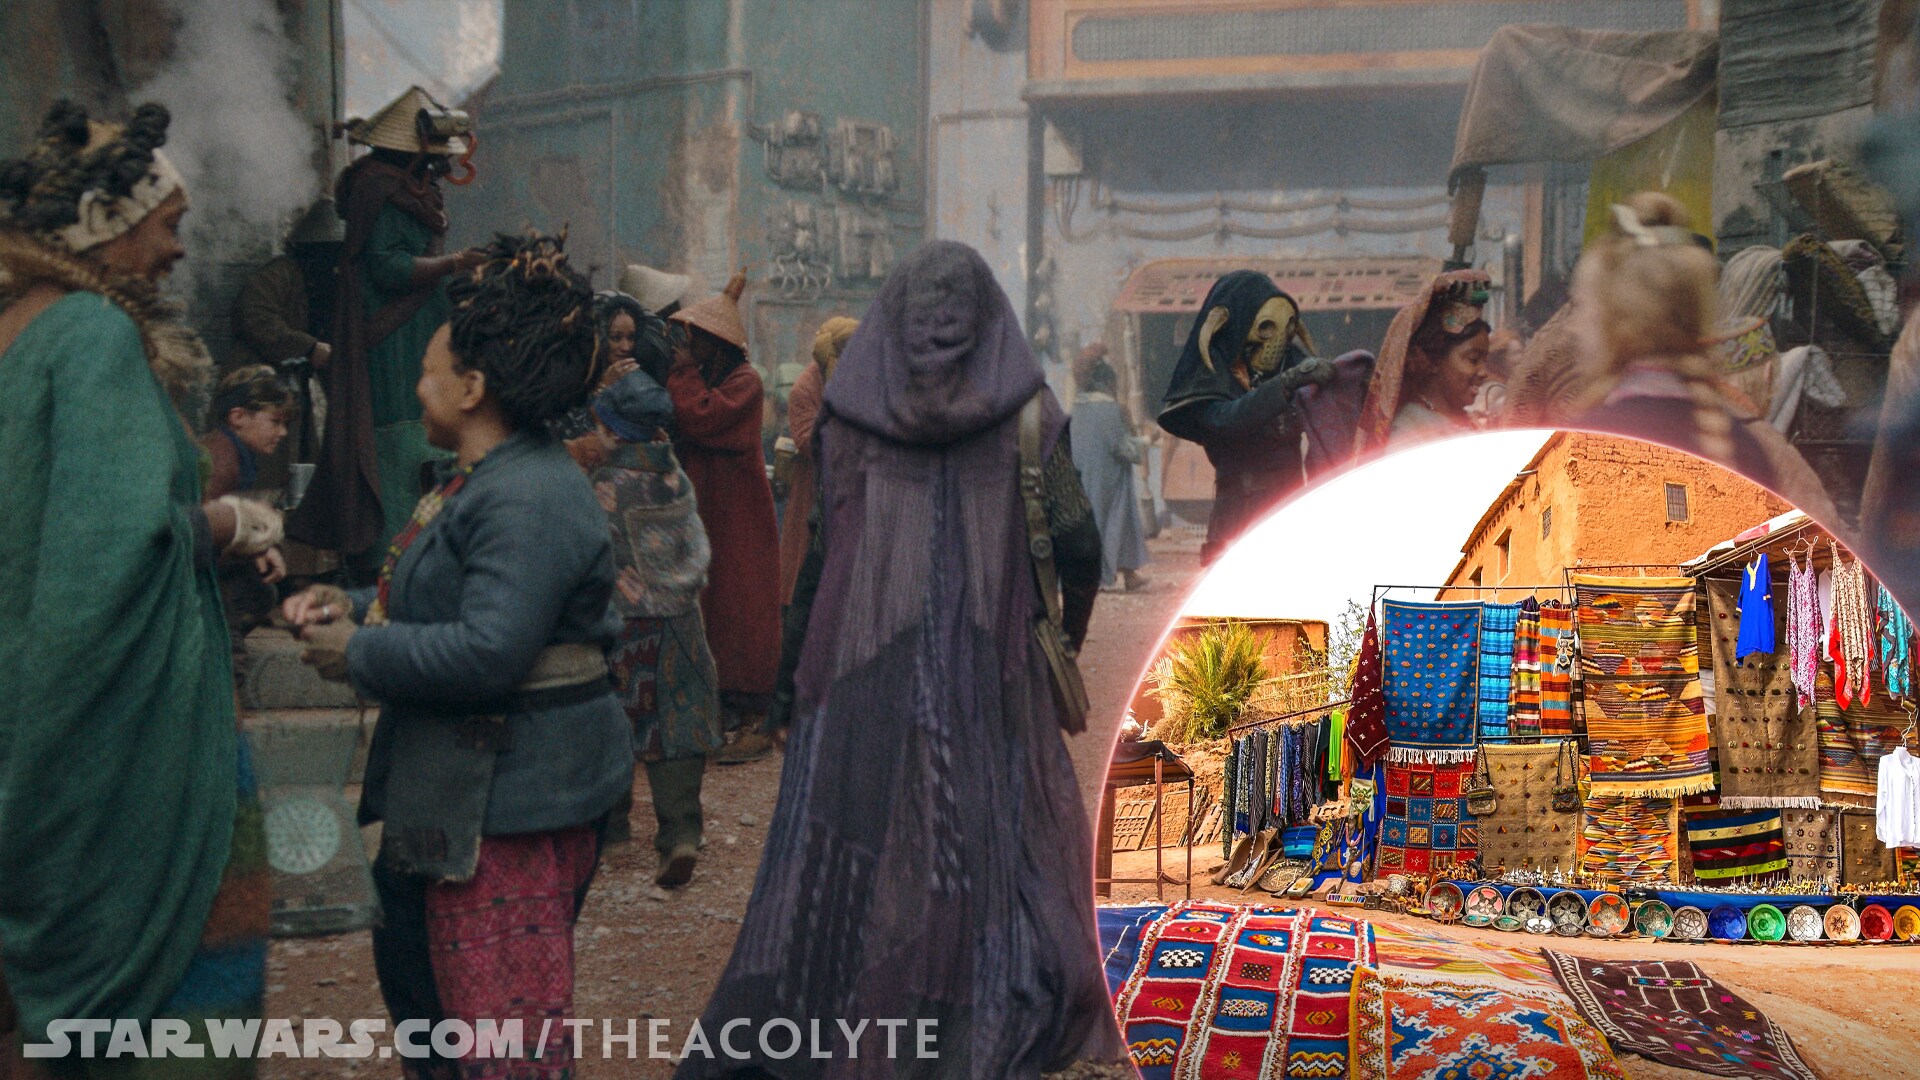 The world of Olega was inspired by the vibrant colors of Marrakesh and Morocco.